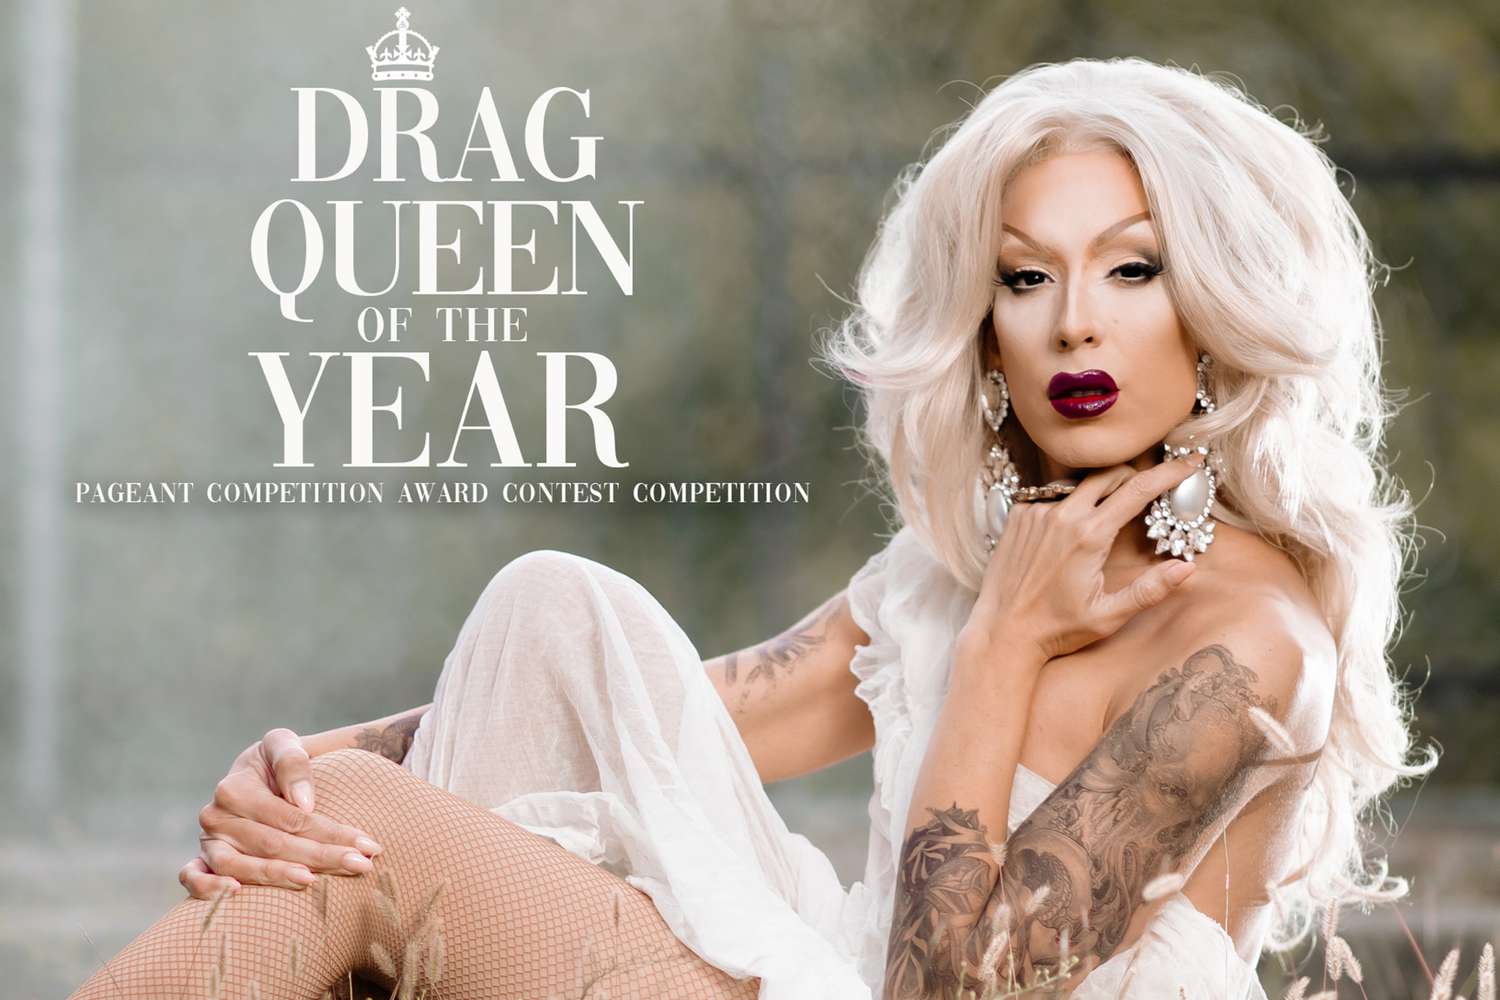 Drag Queen of the Year